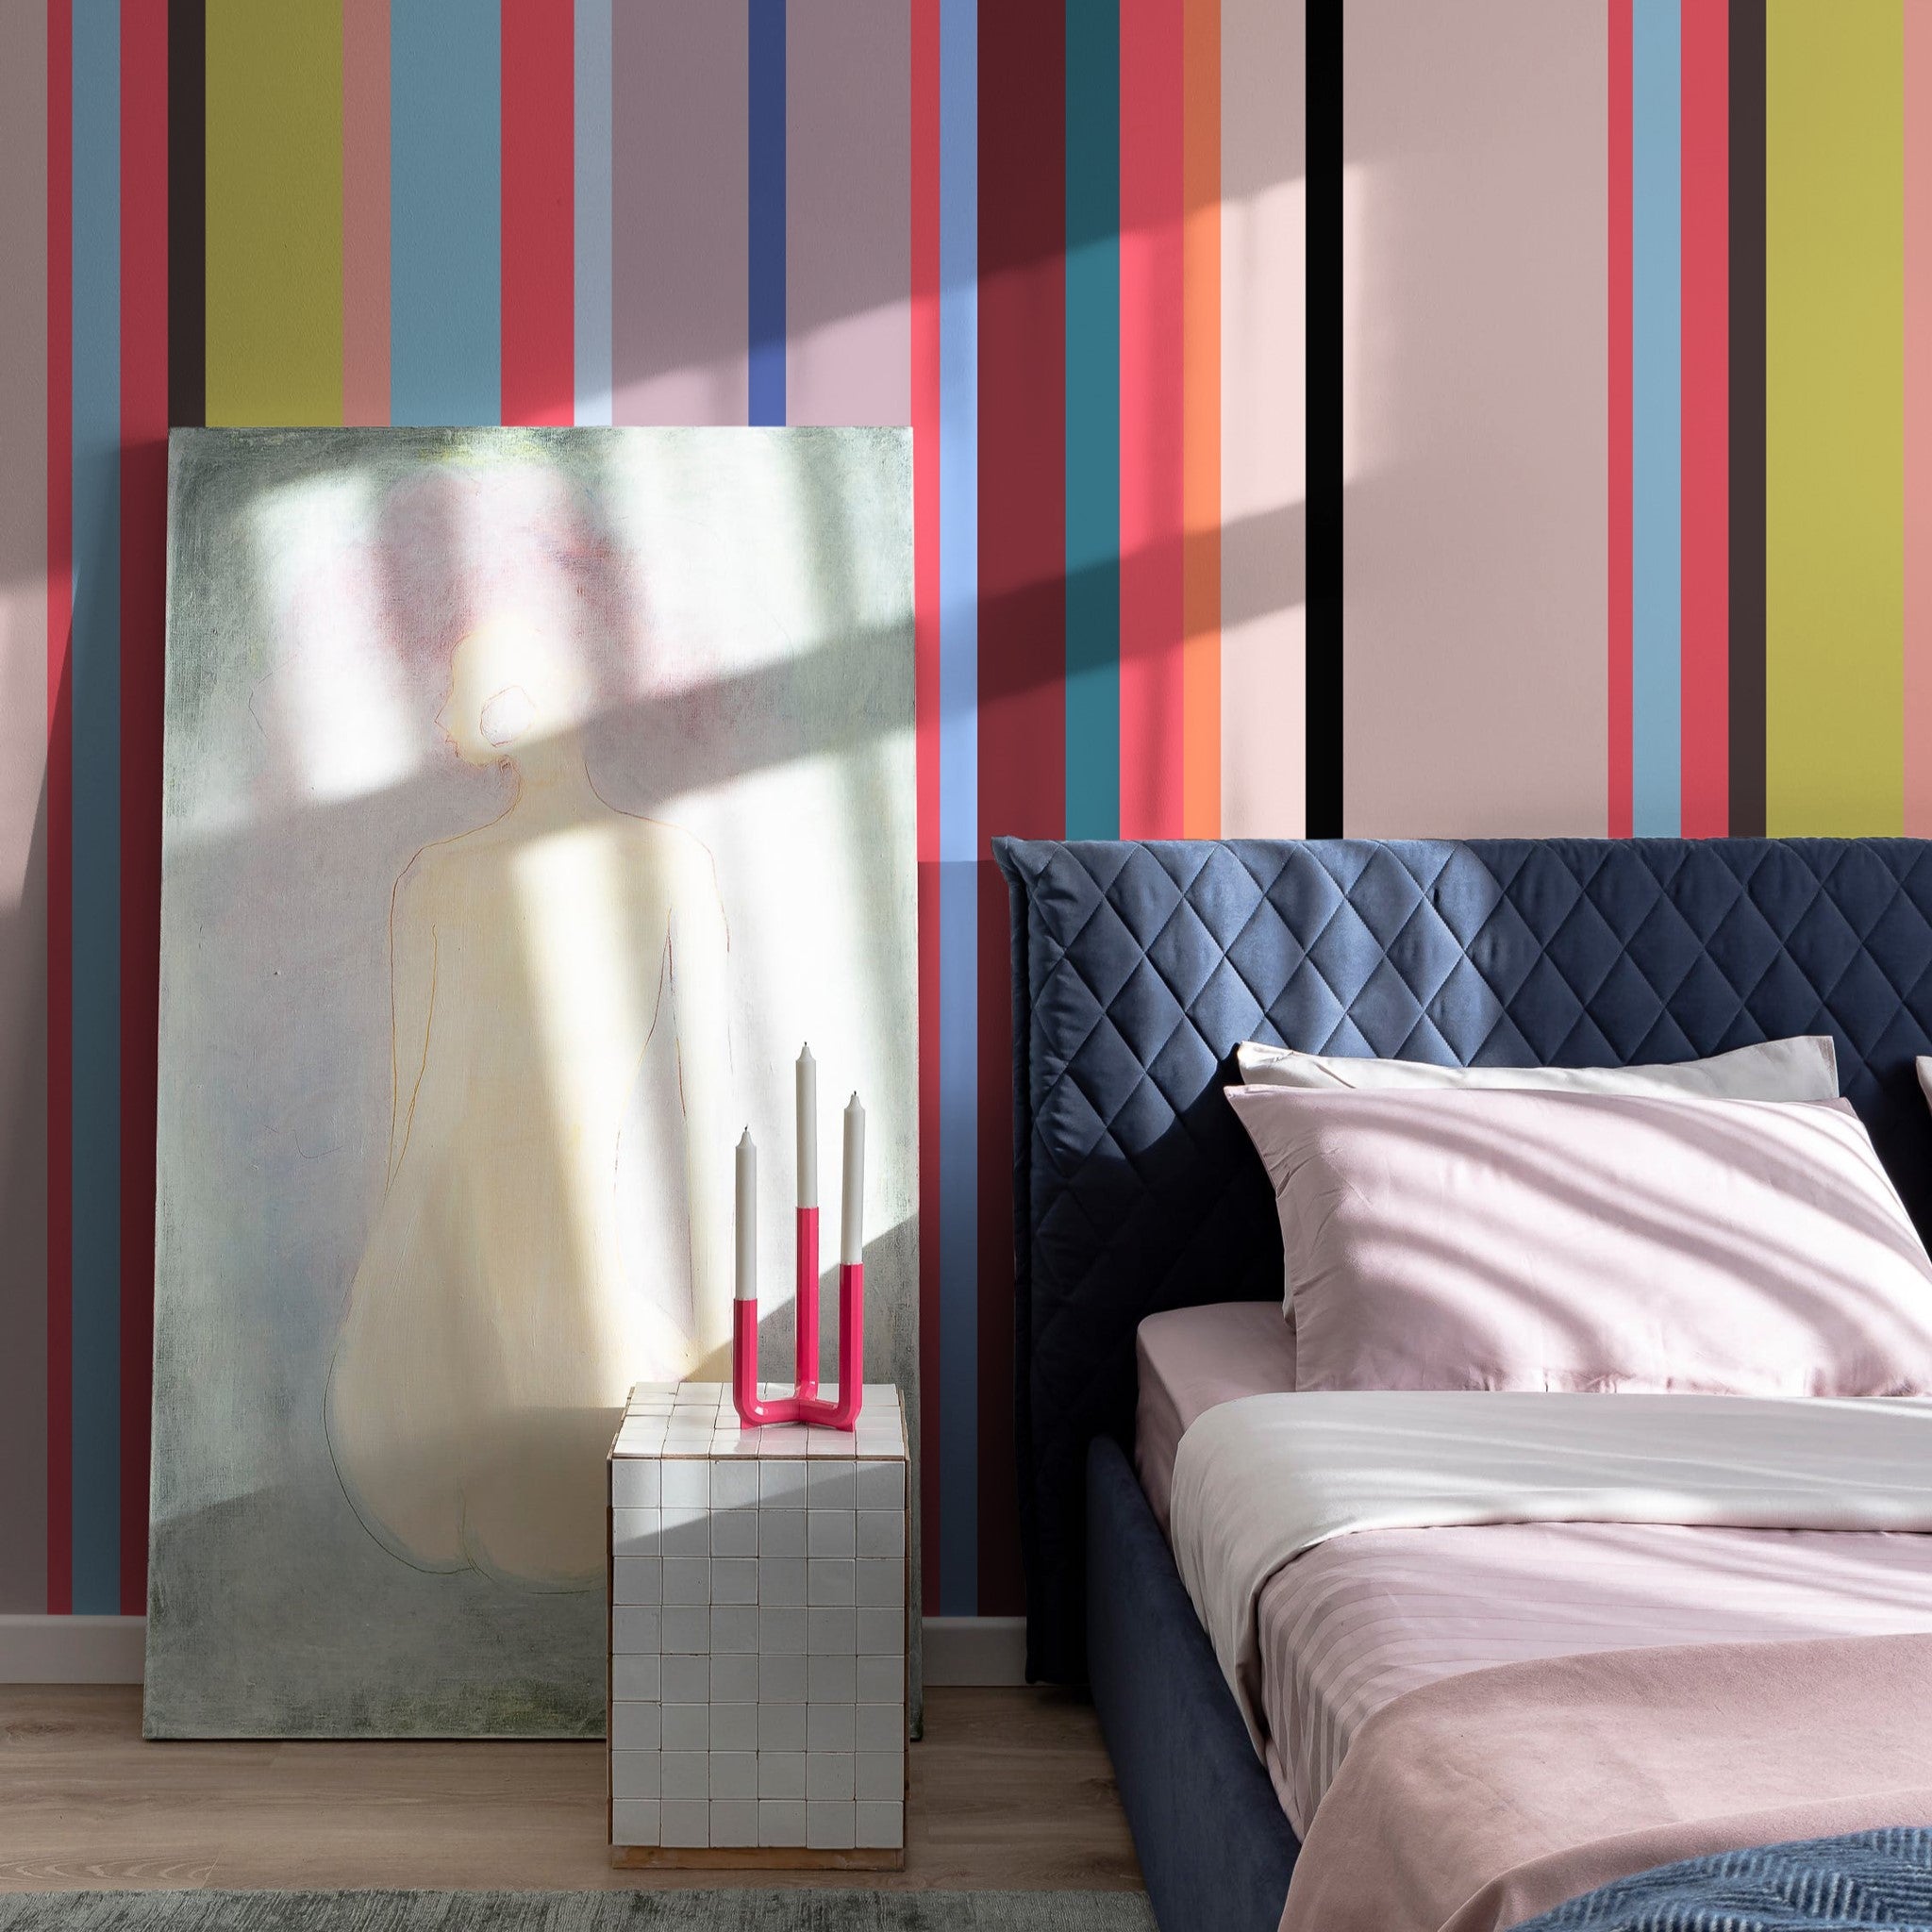 "Wall Blush's So Fetch Wallpaper featured in a modern bedroom, colorful striped design as the focal point."